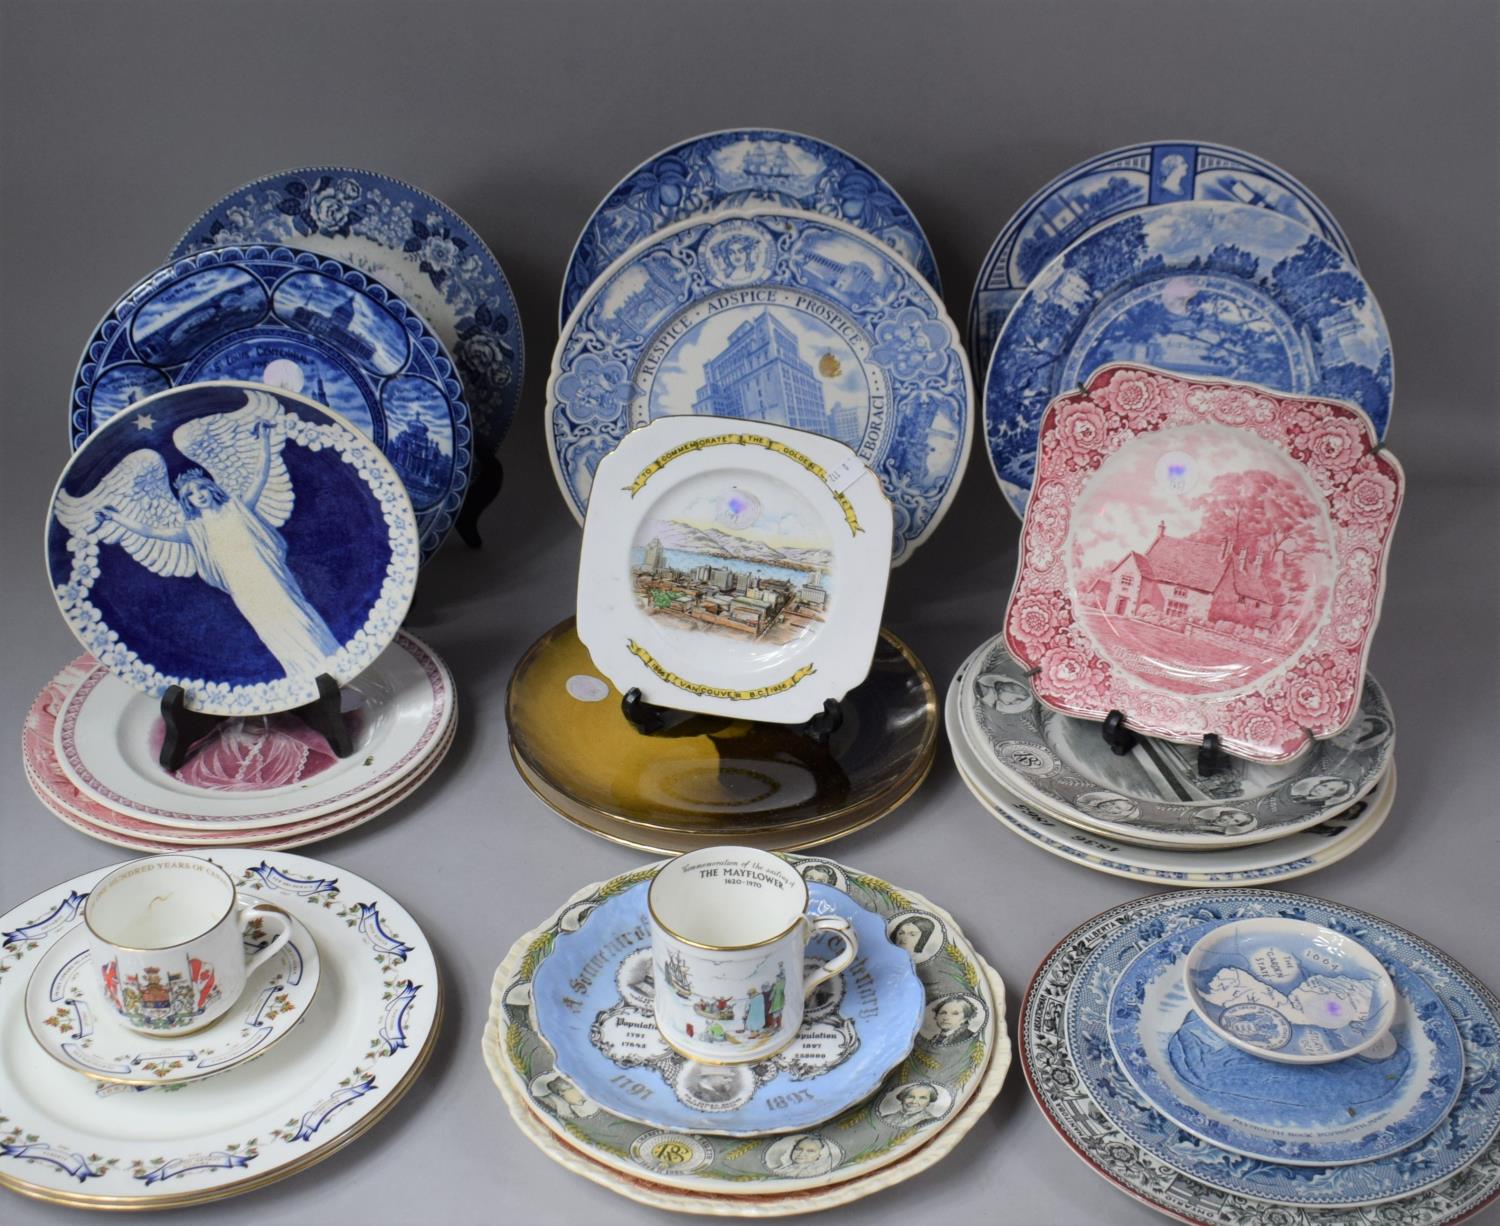 A Large Collection of Transfer Printed Commemorative Ceramics on a Topic of America and Canada to